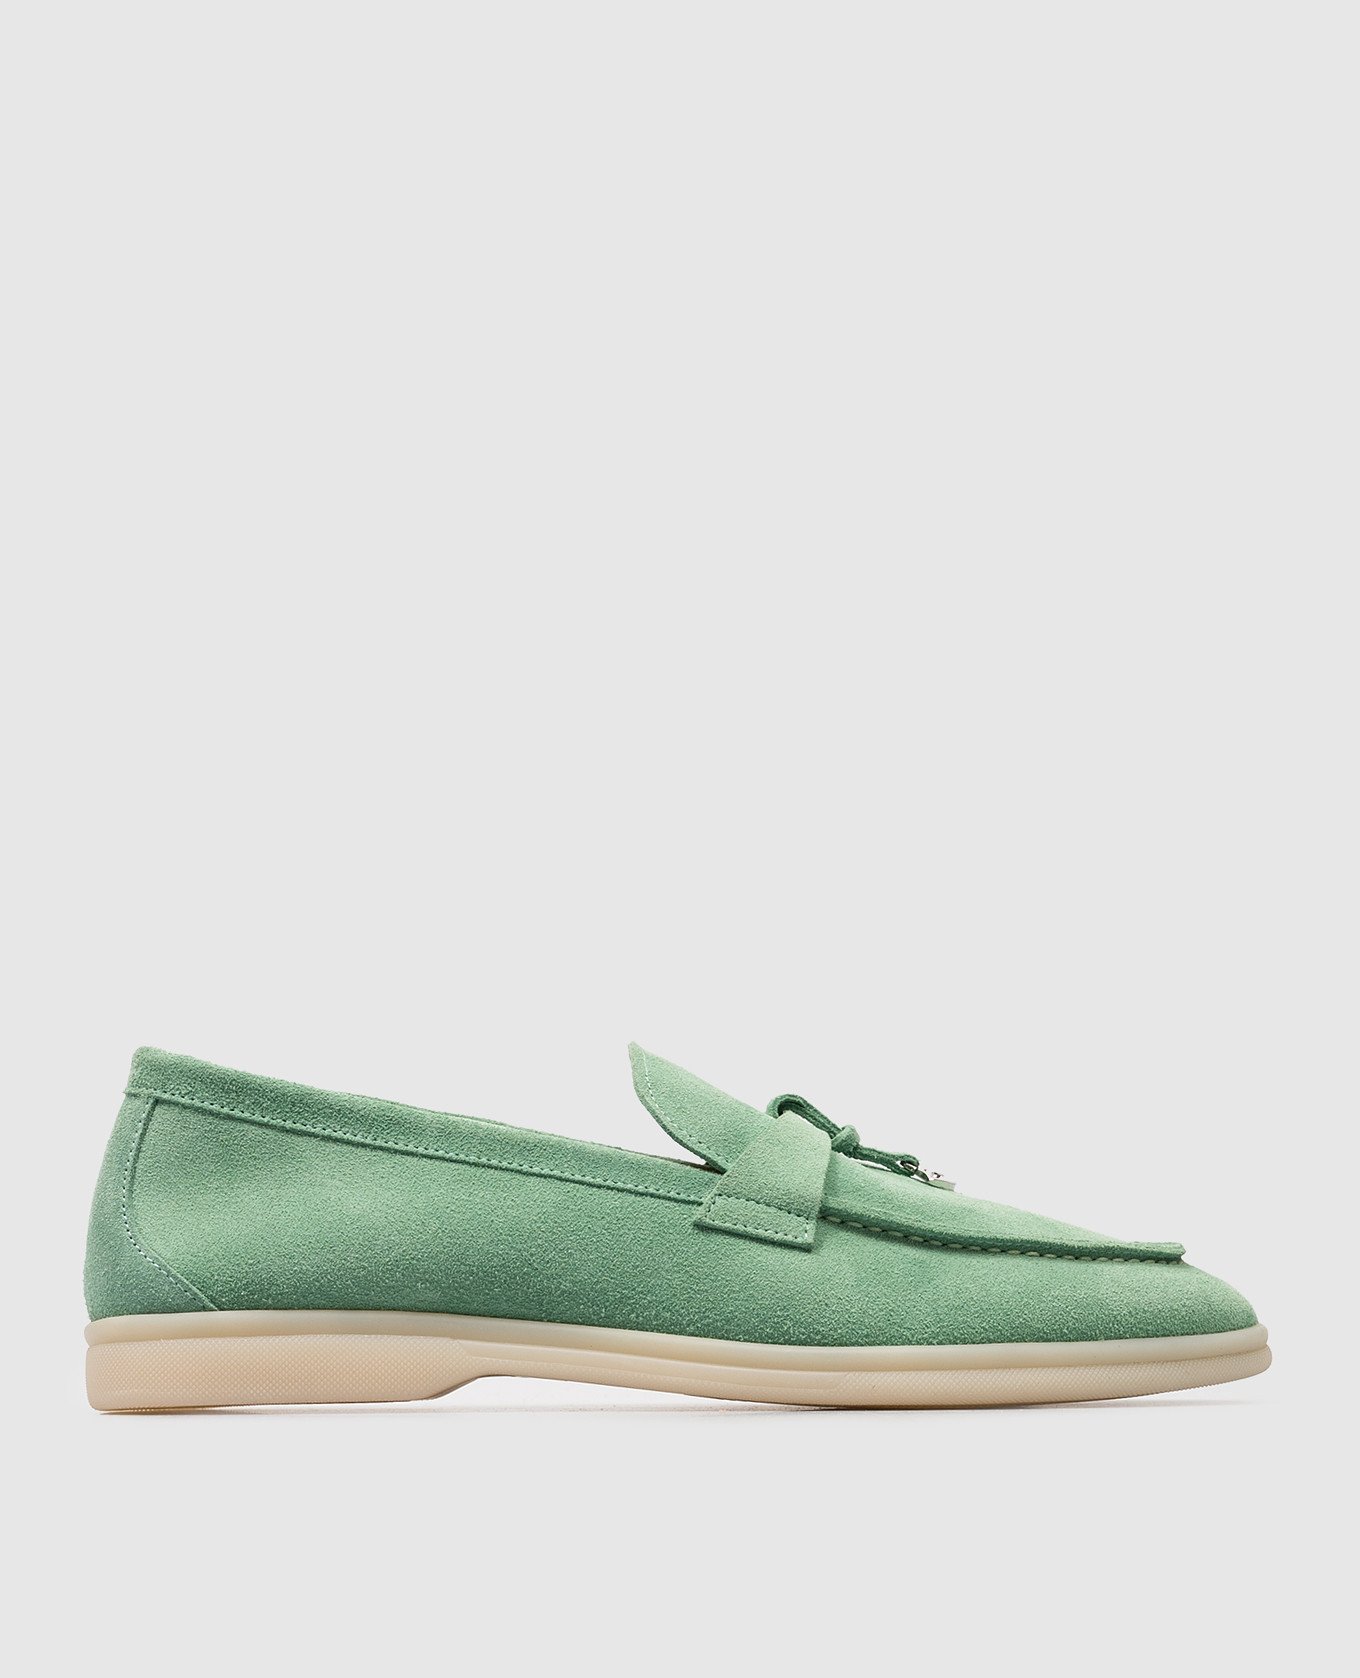 Green suede loafers with metallic logo